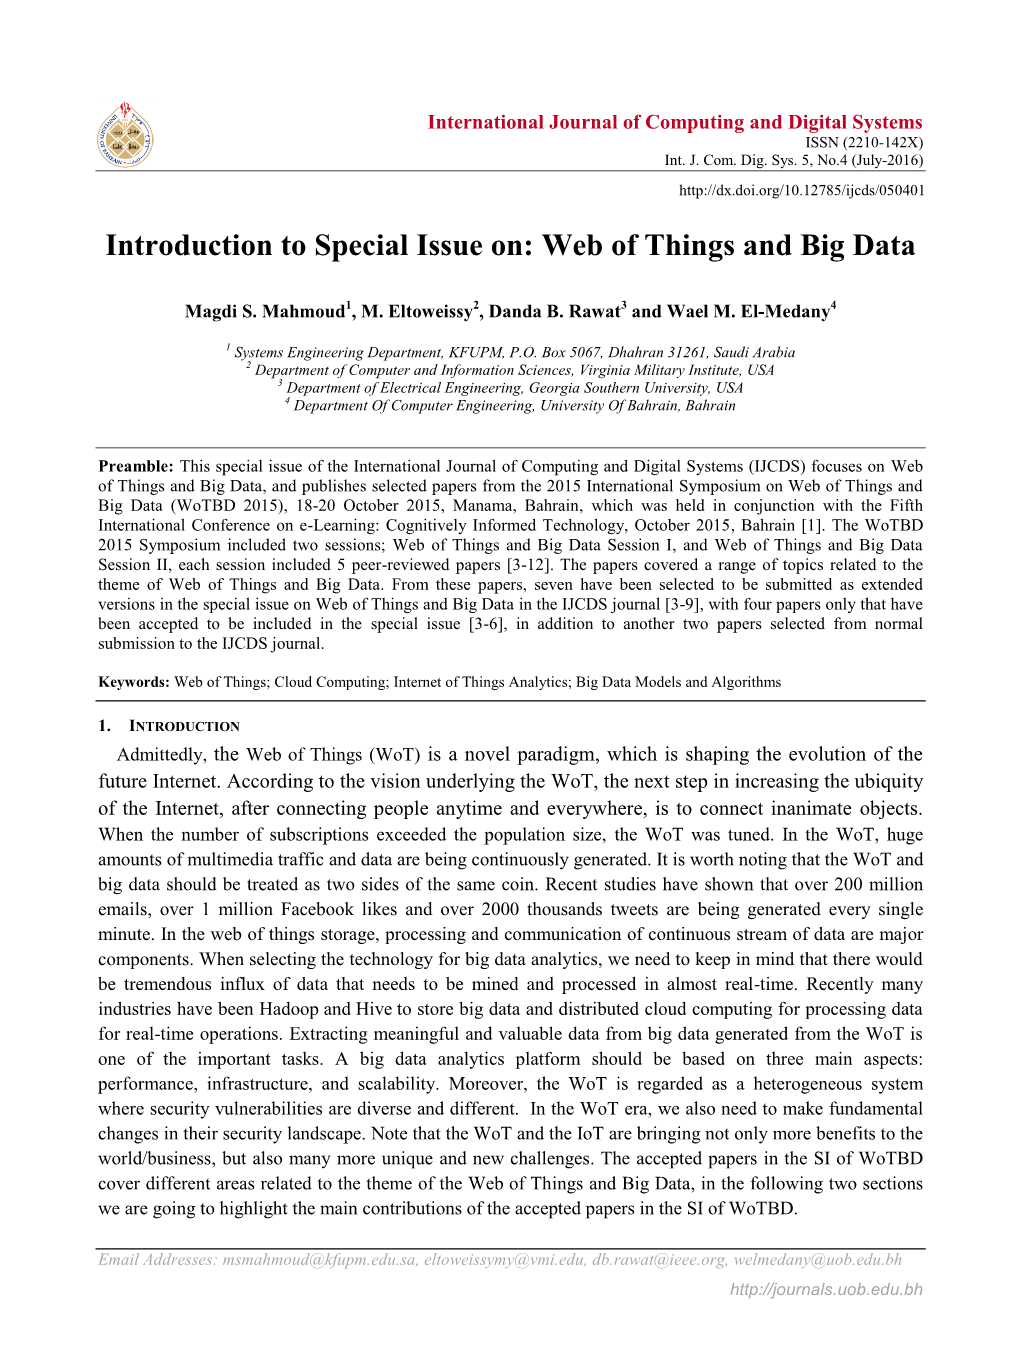 Introduction to Special Issue On: Web of Things and Big Data